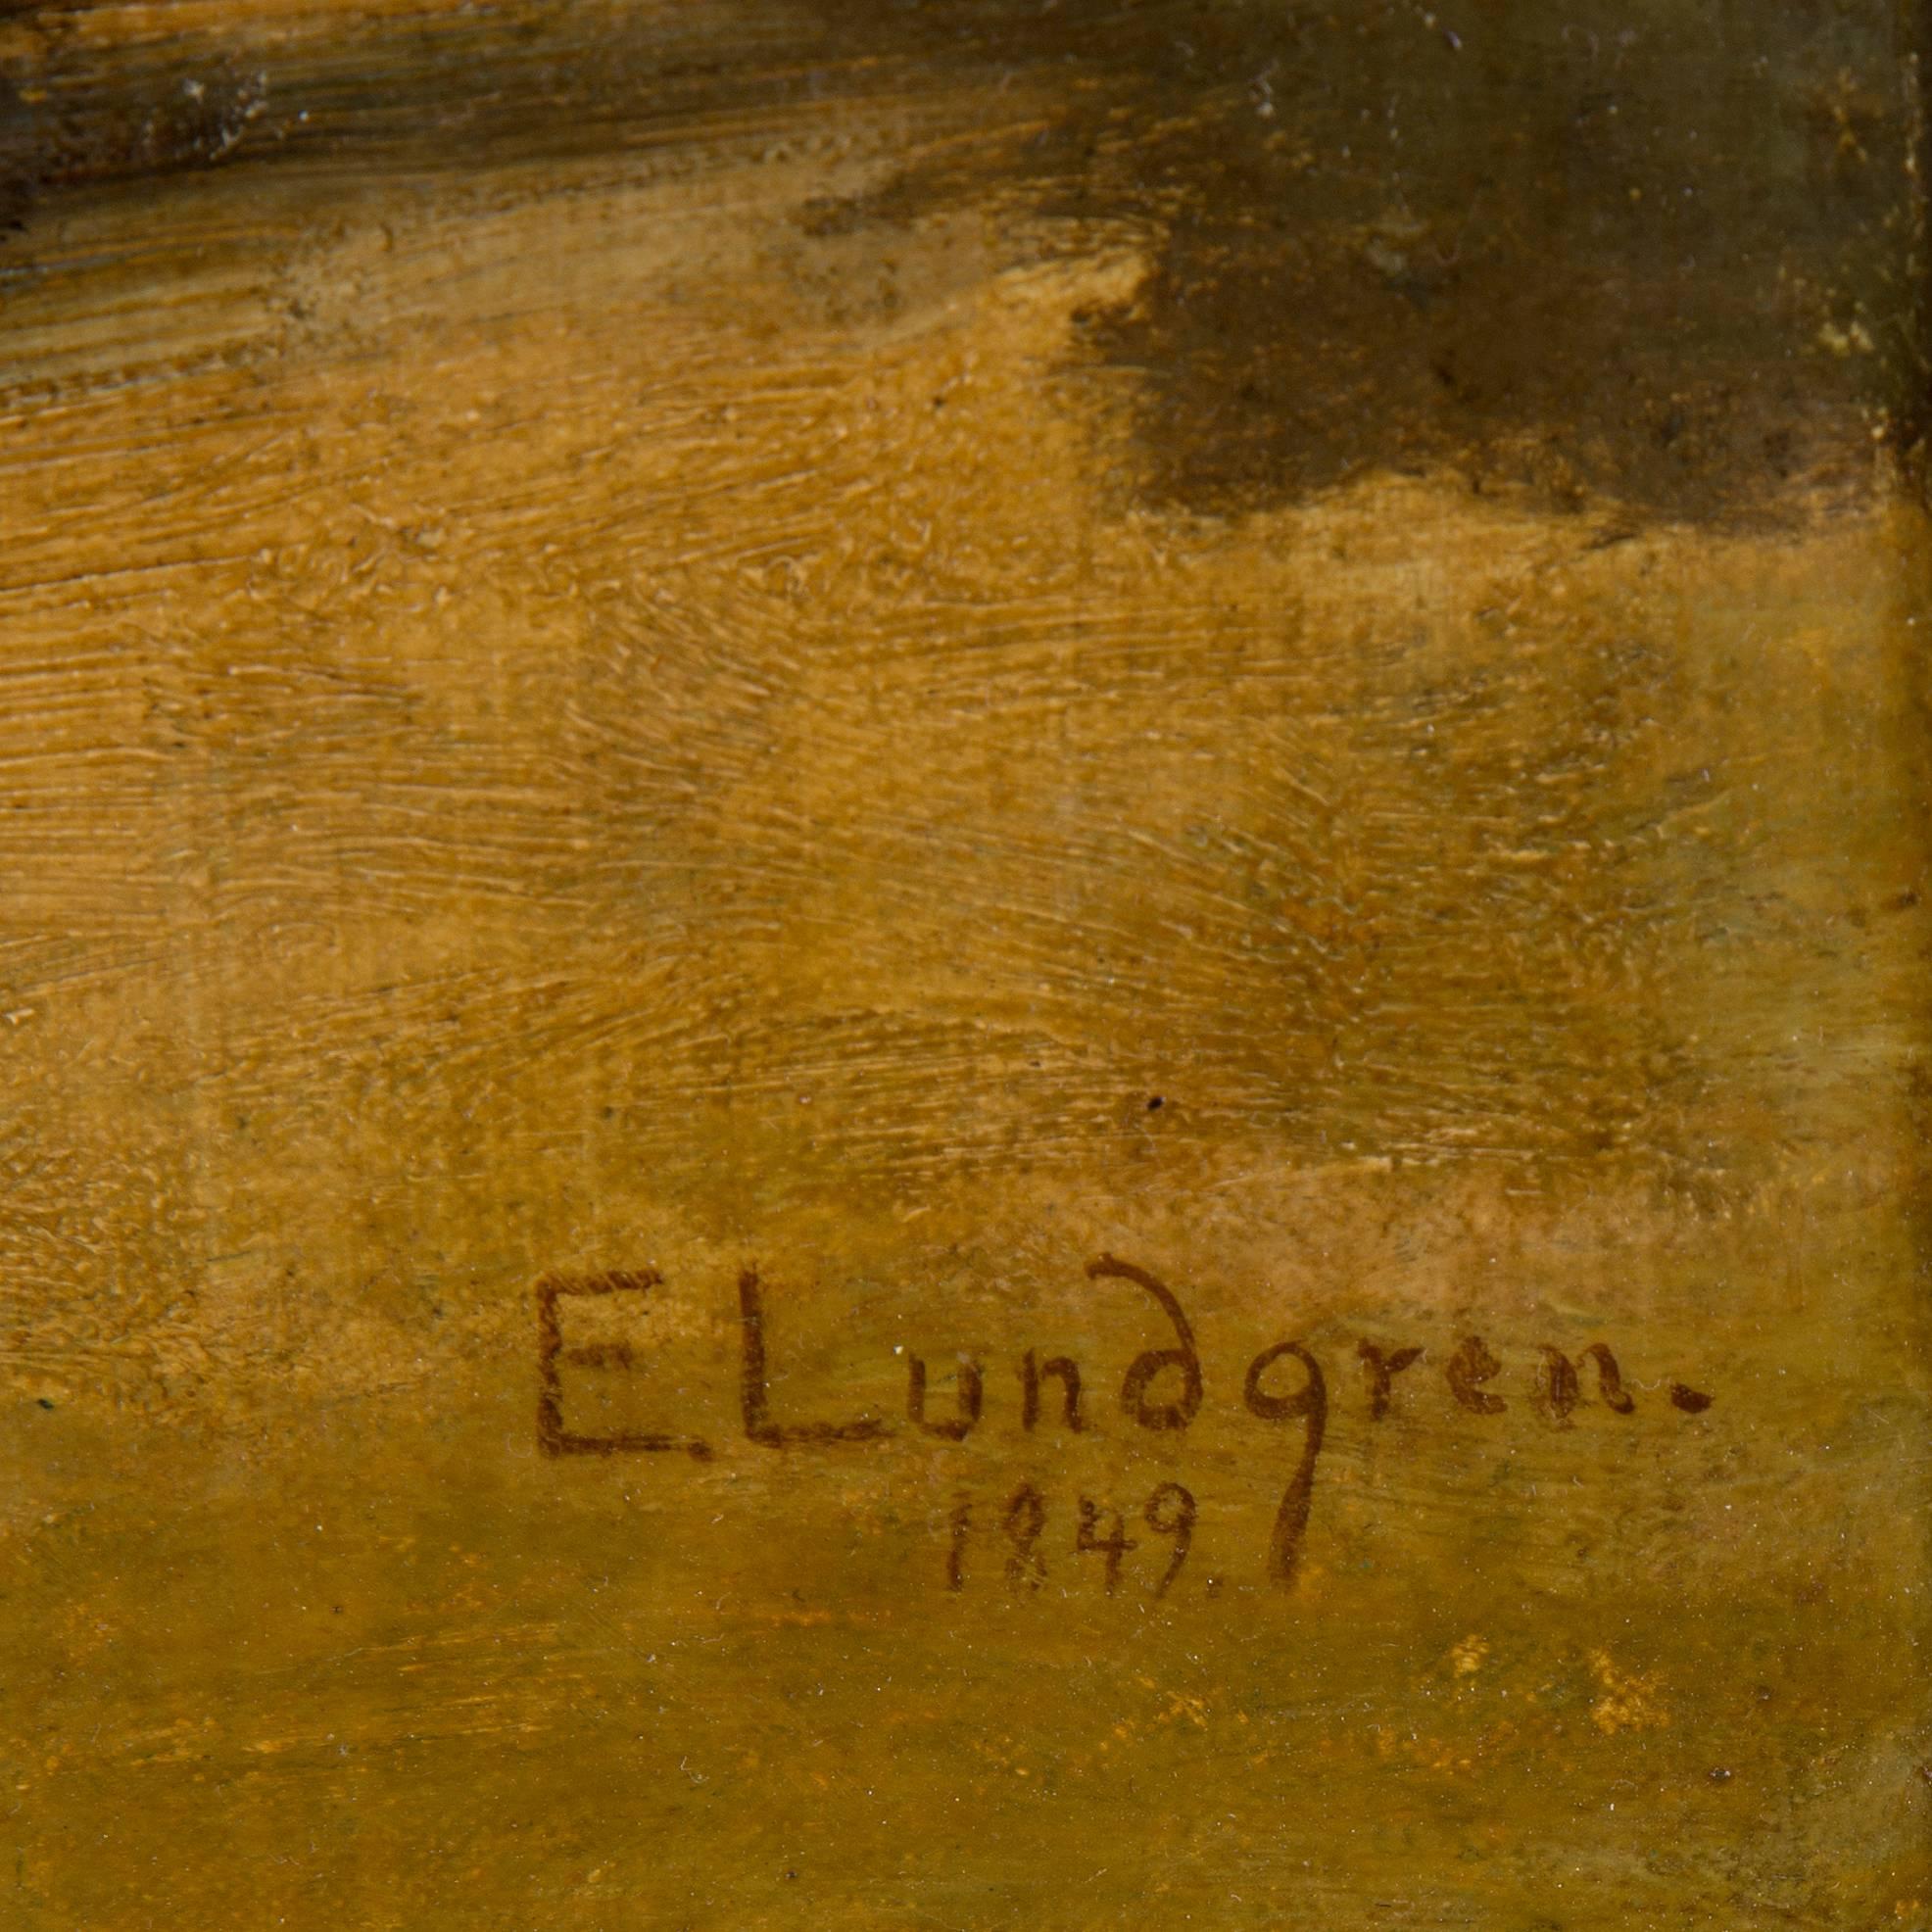 Egron Lundgren, oil on relined canvas, signed and dated 1849.
Dimensions:
46 x 38 cm.